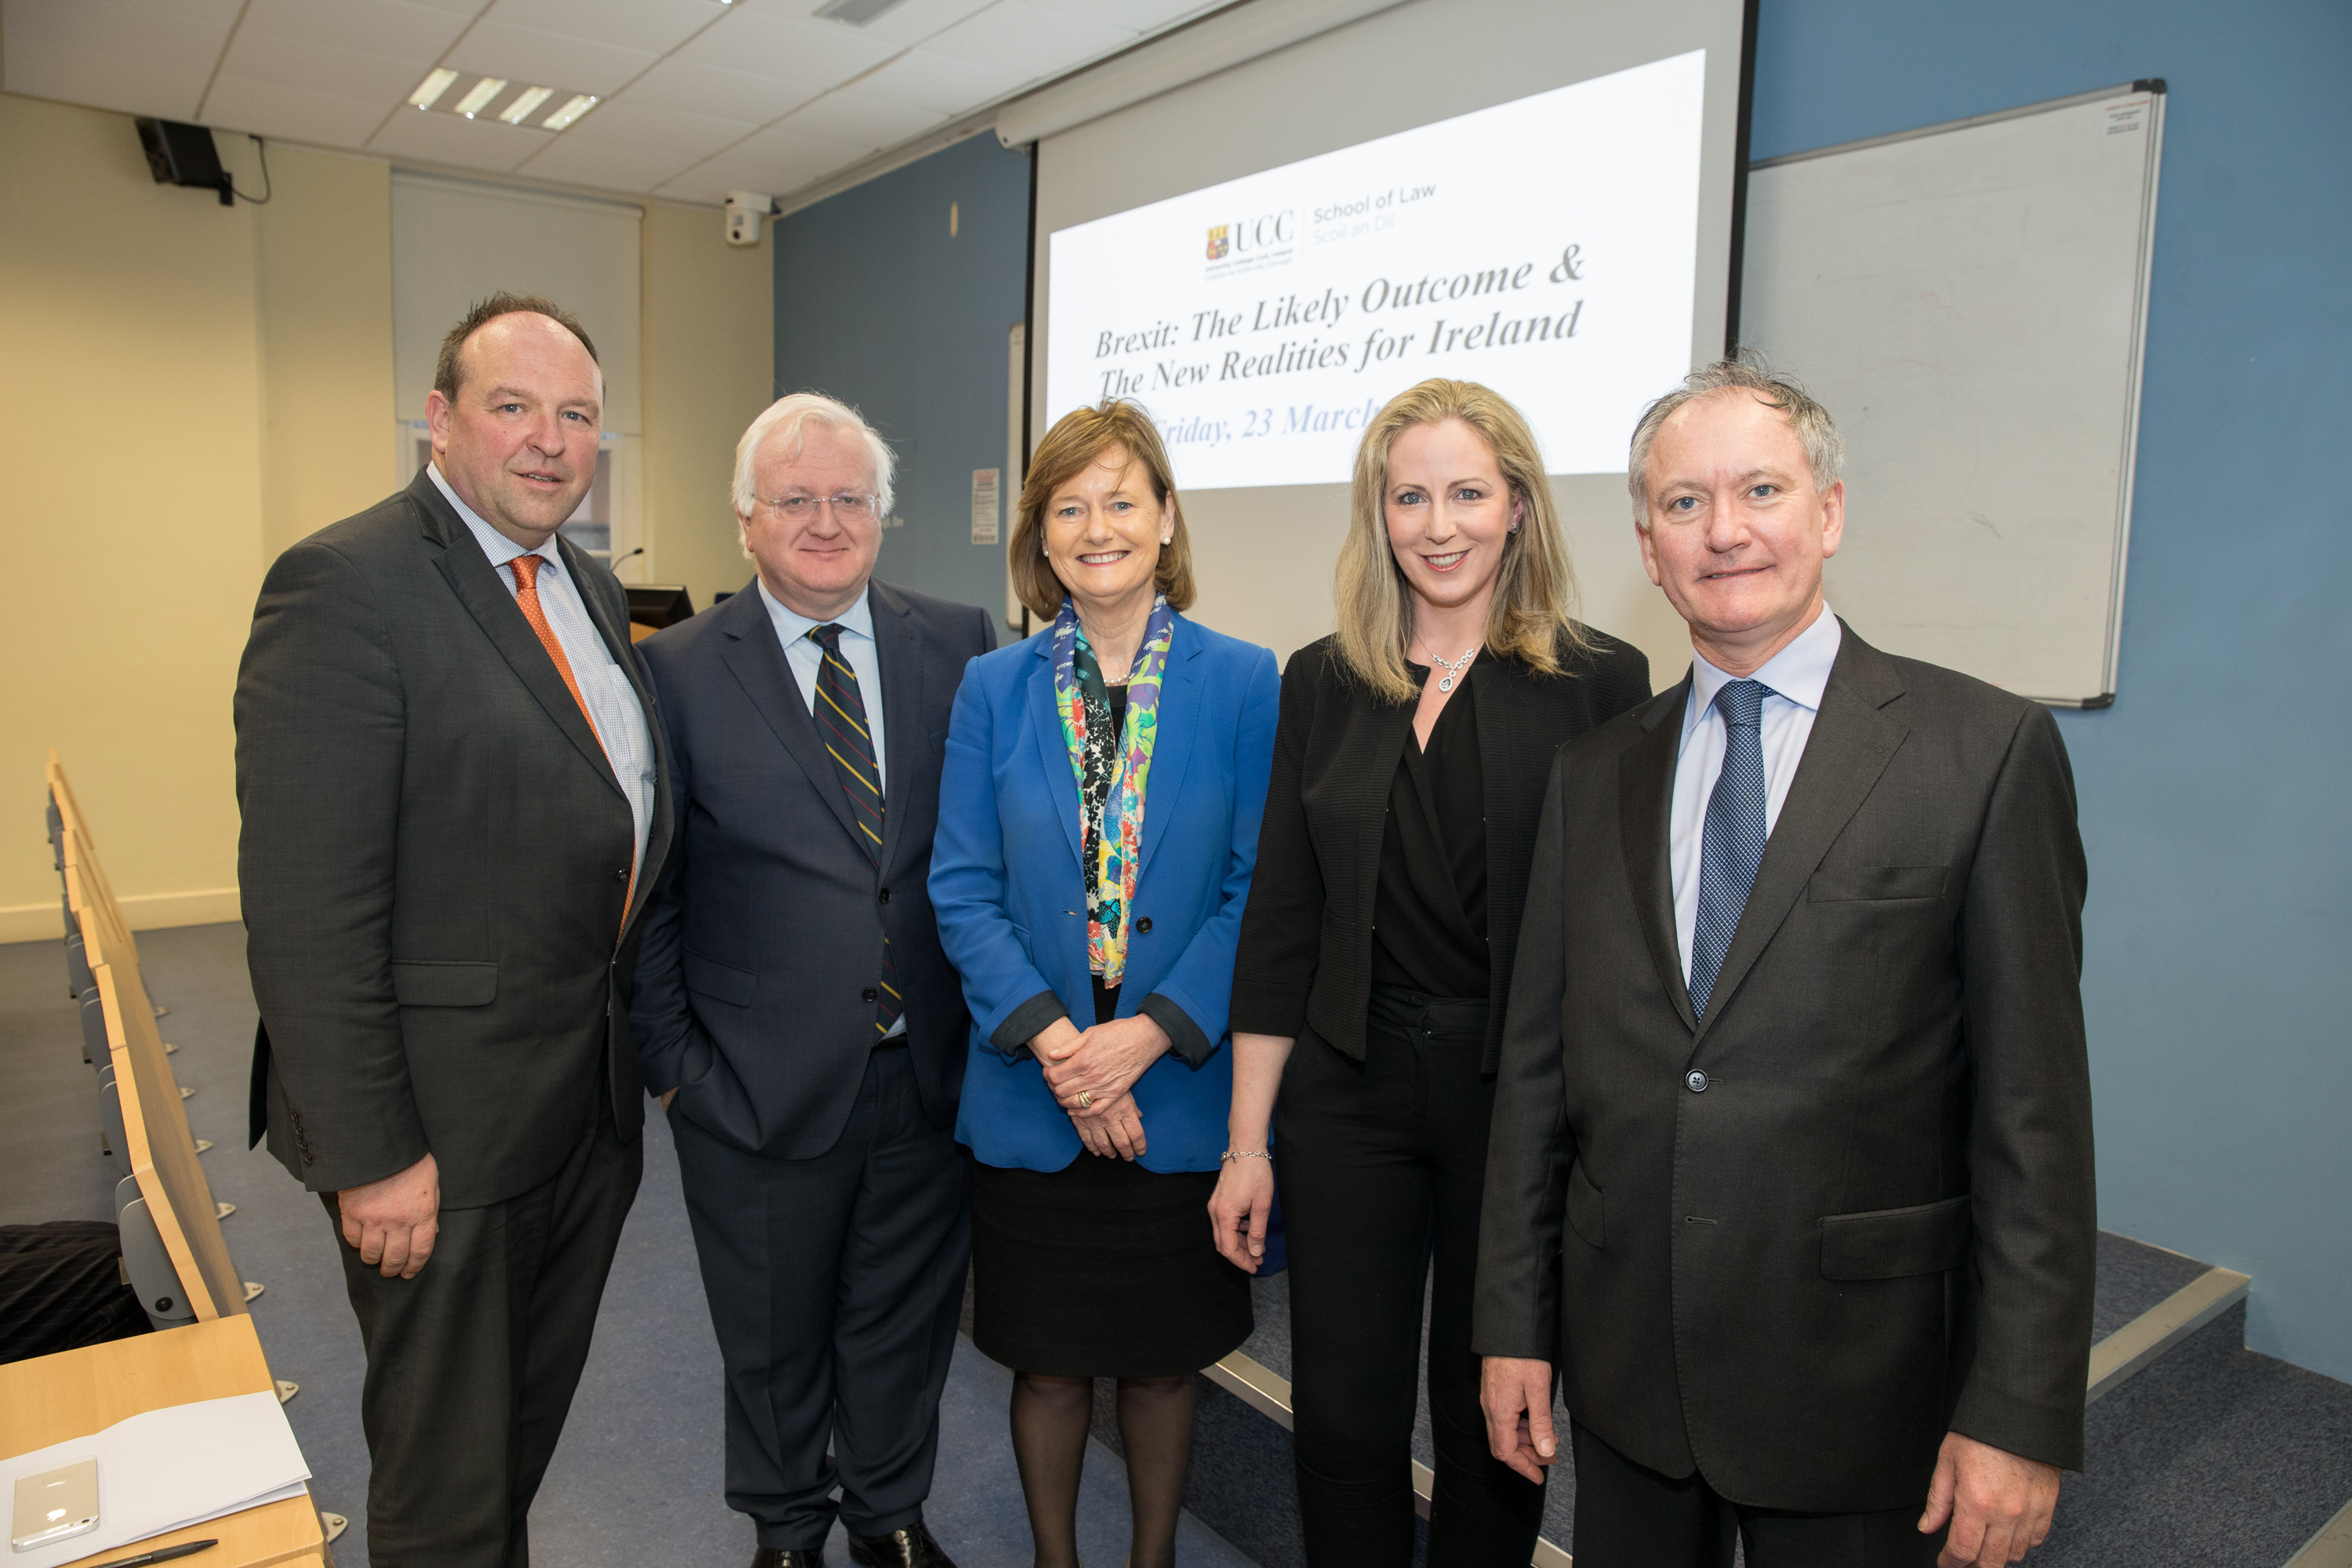 Declan Walsh stands along side Dr Vincent Power, Deirdre Clune MEP, Dr Mary C. Murphy, and Judge Anthony M Collins ahead of our Brexit Seminar 